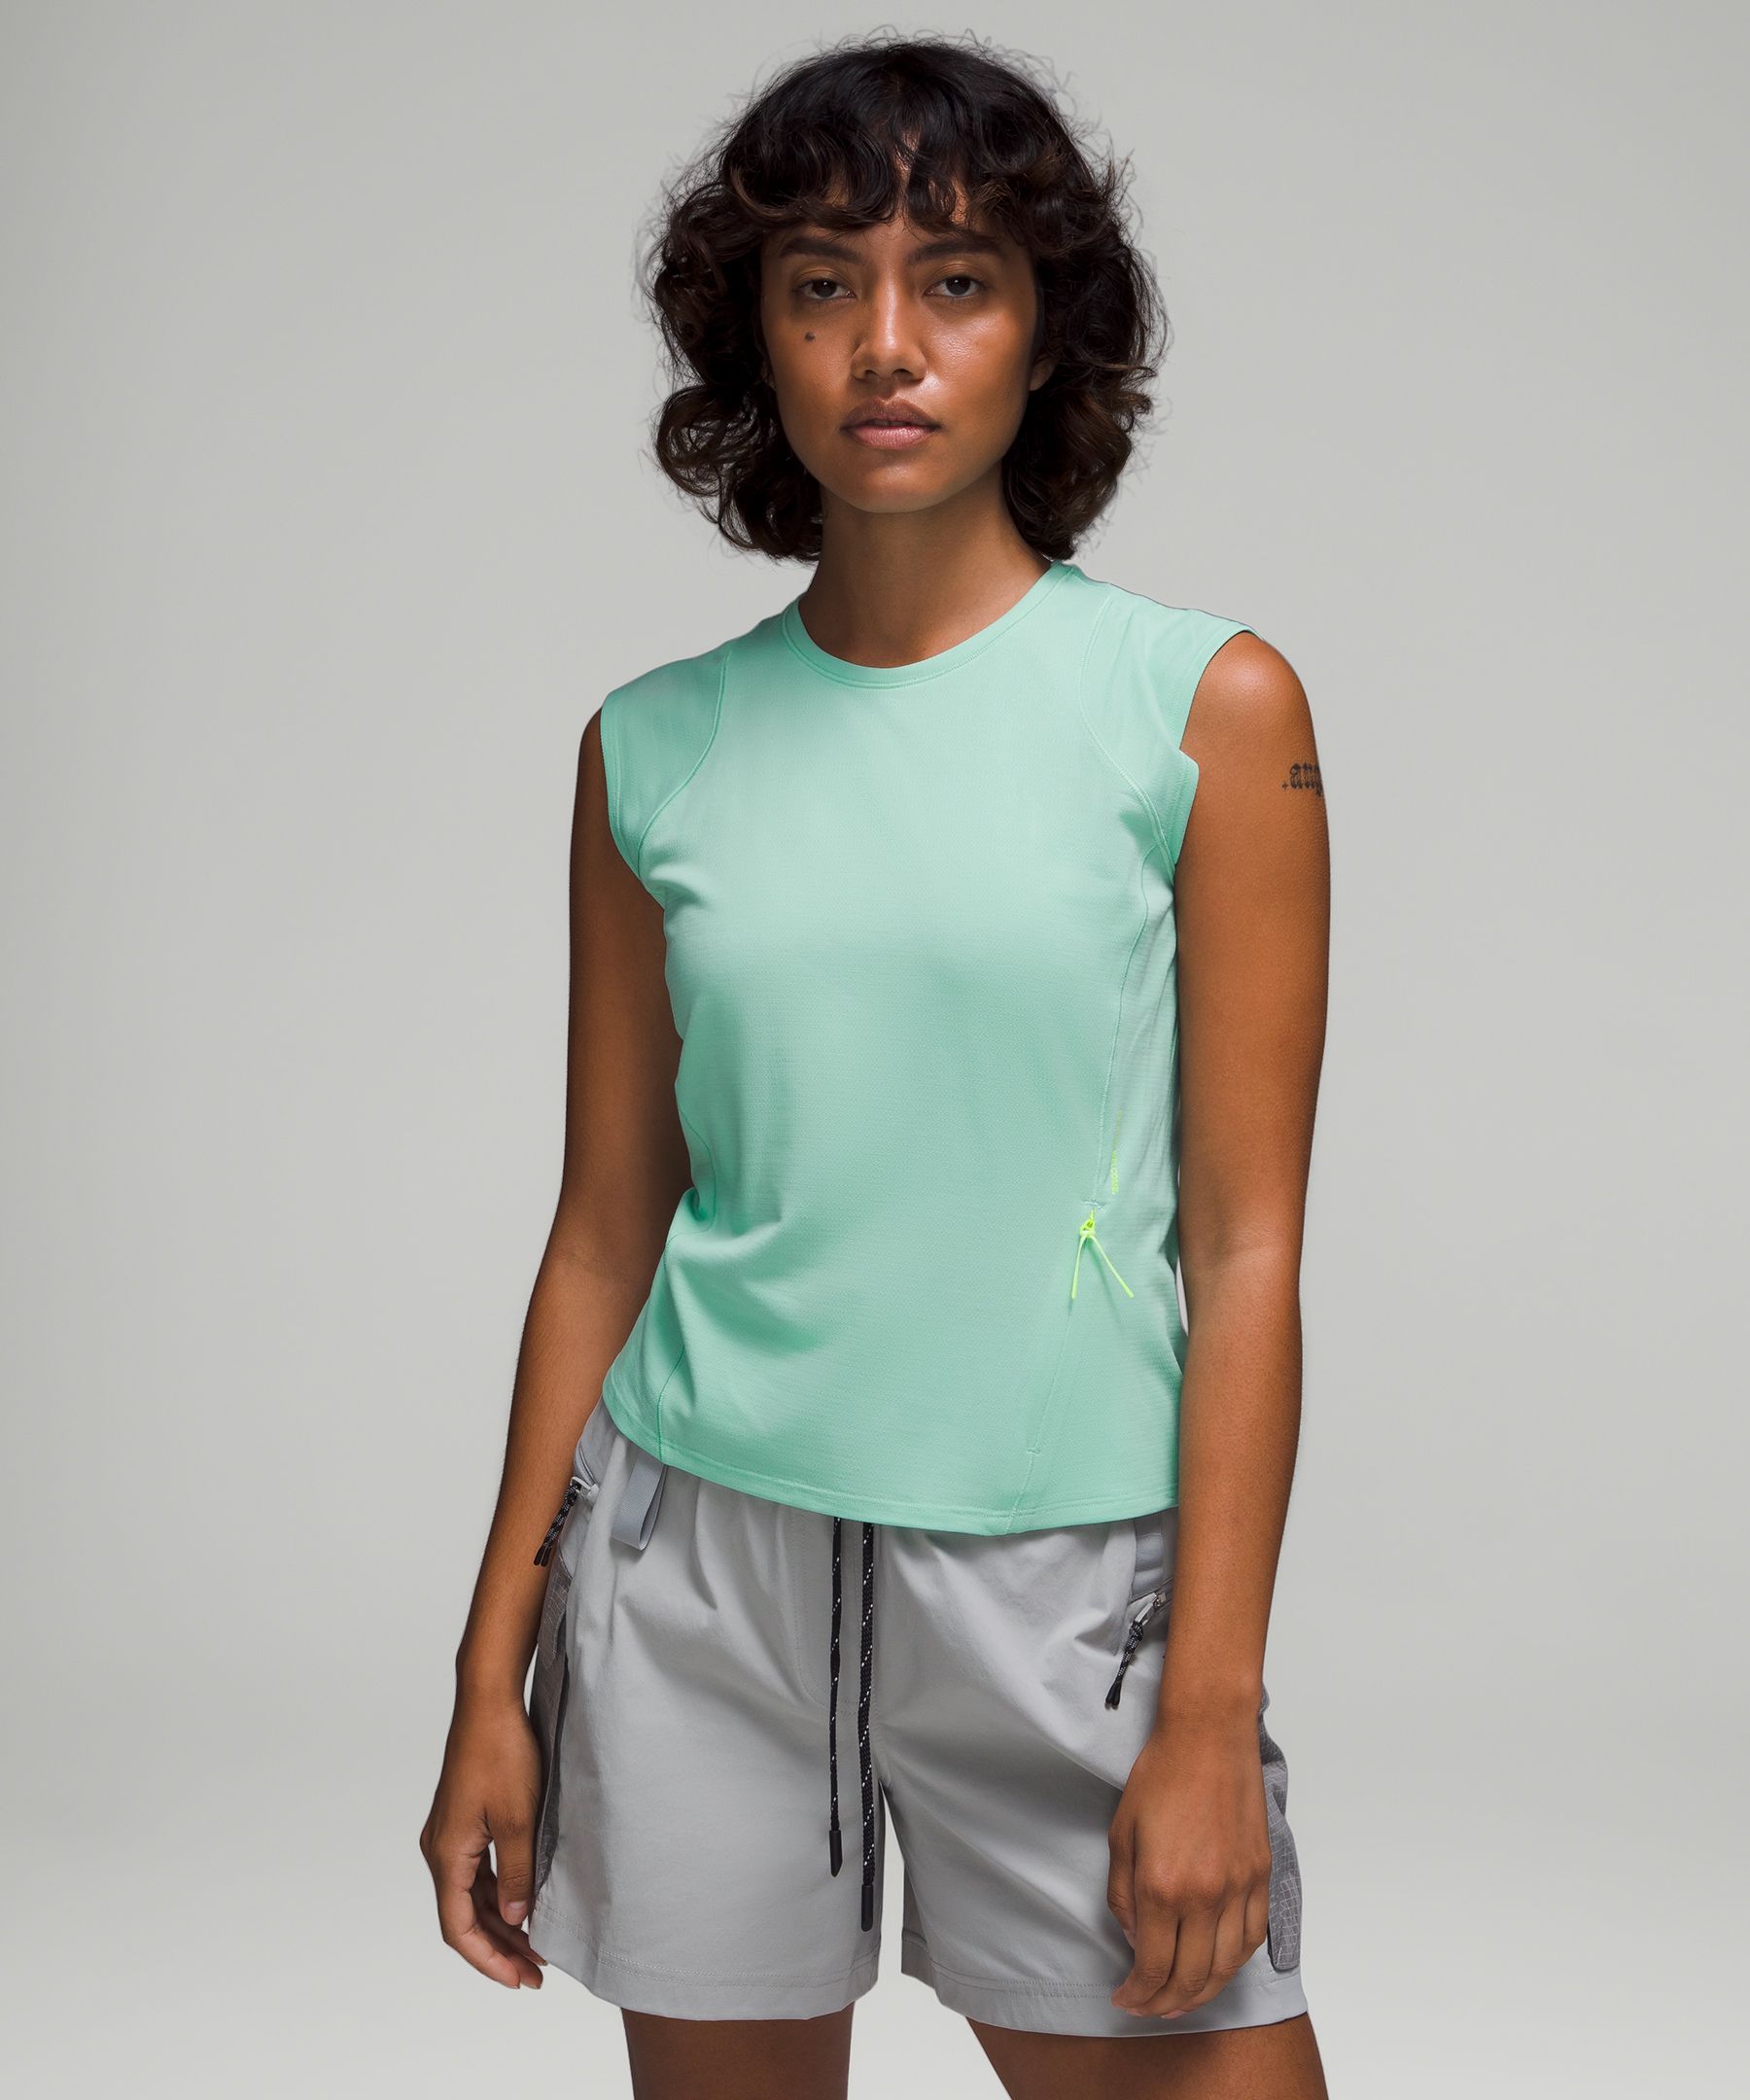 teal tank tops for women